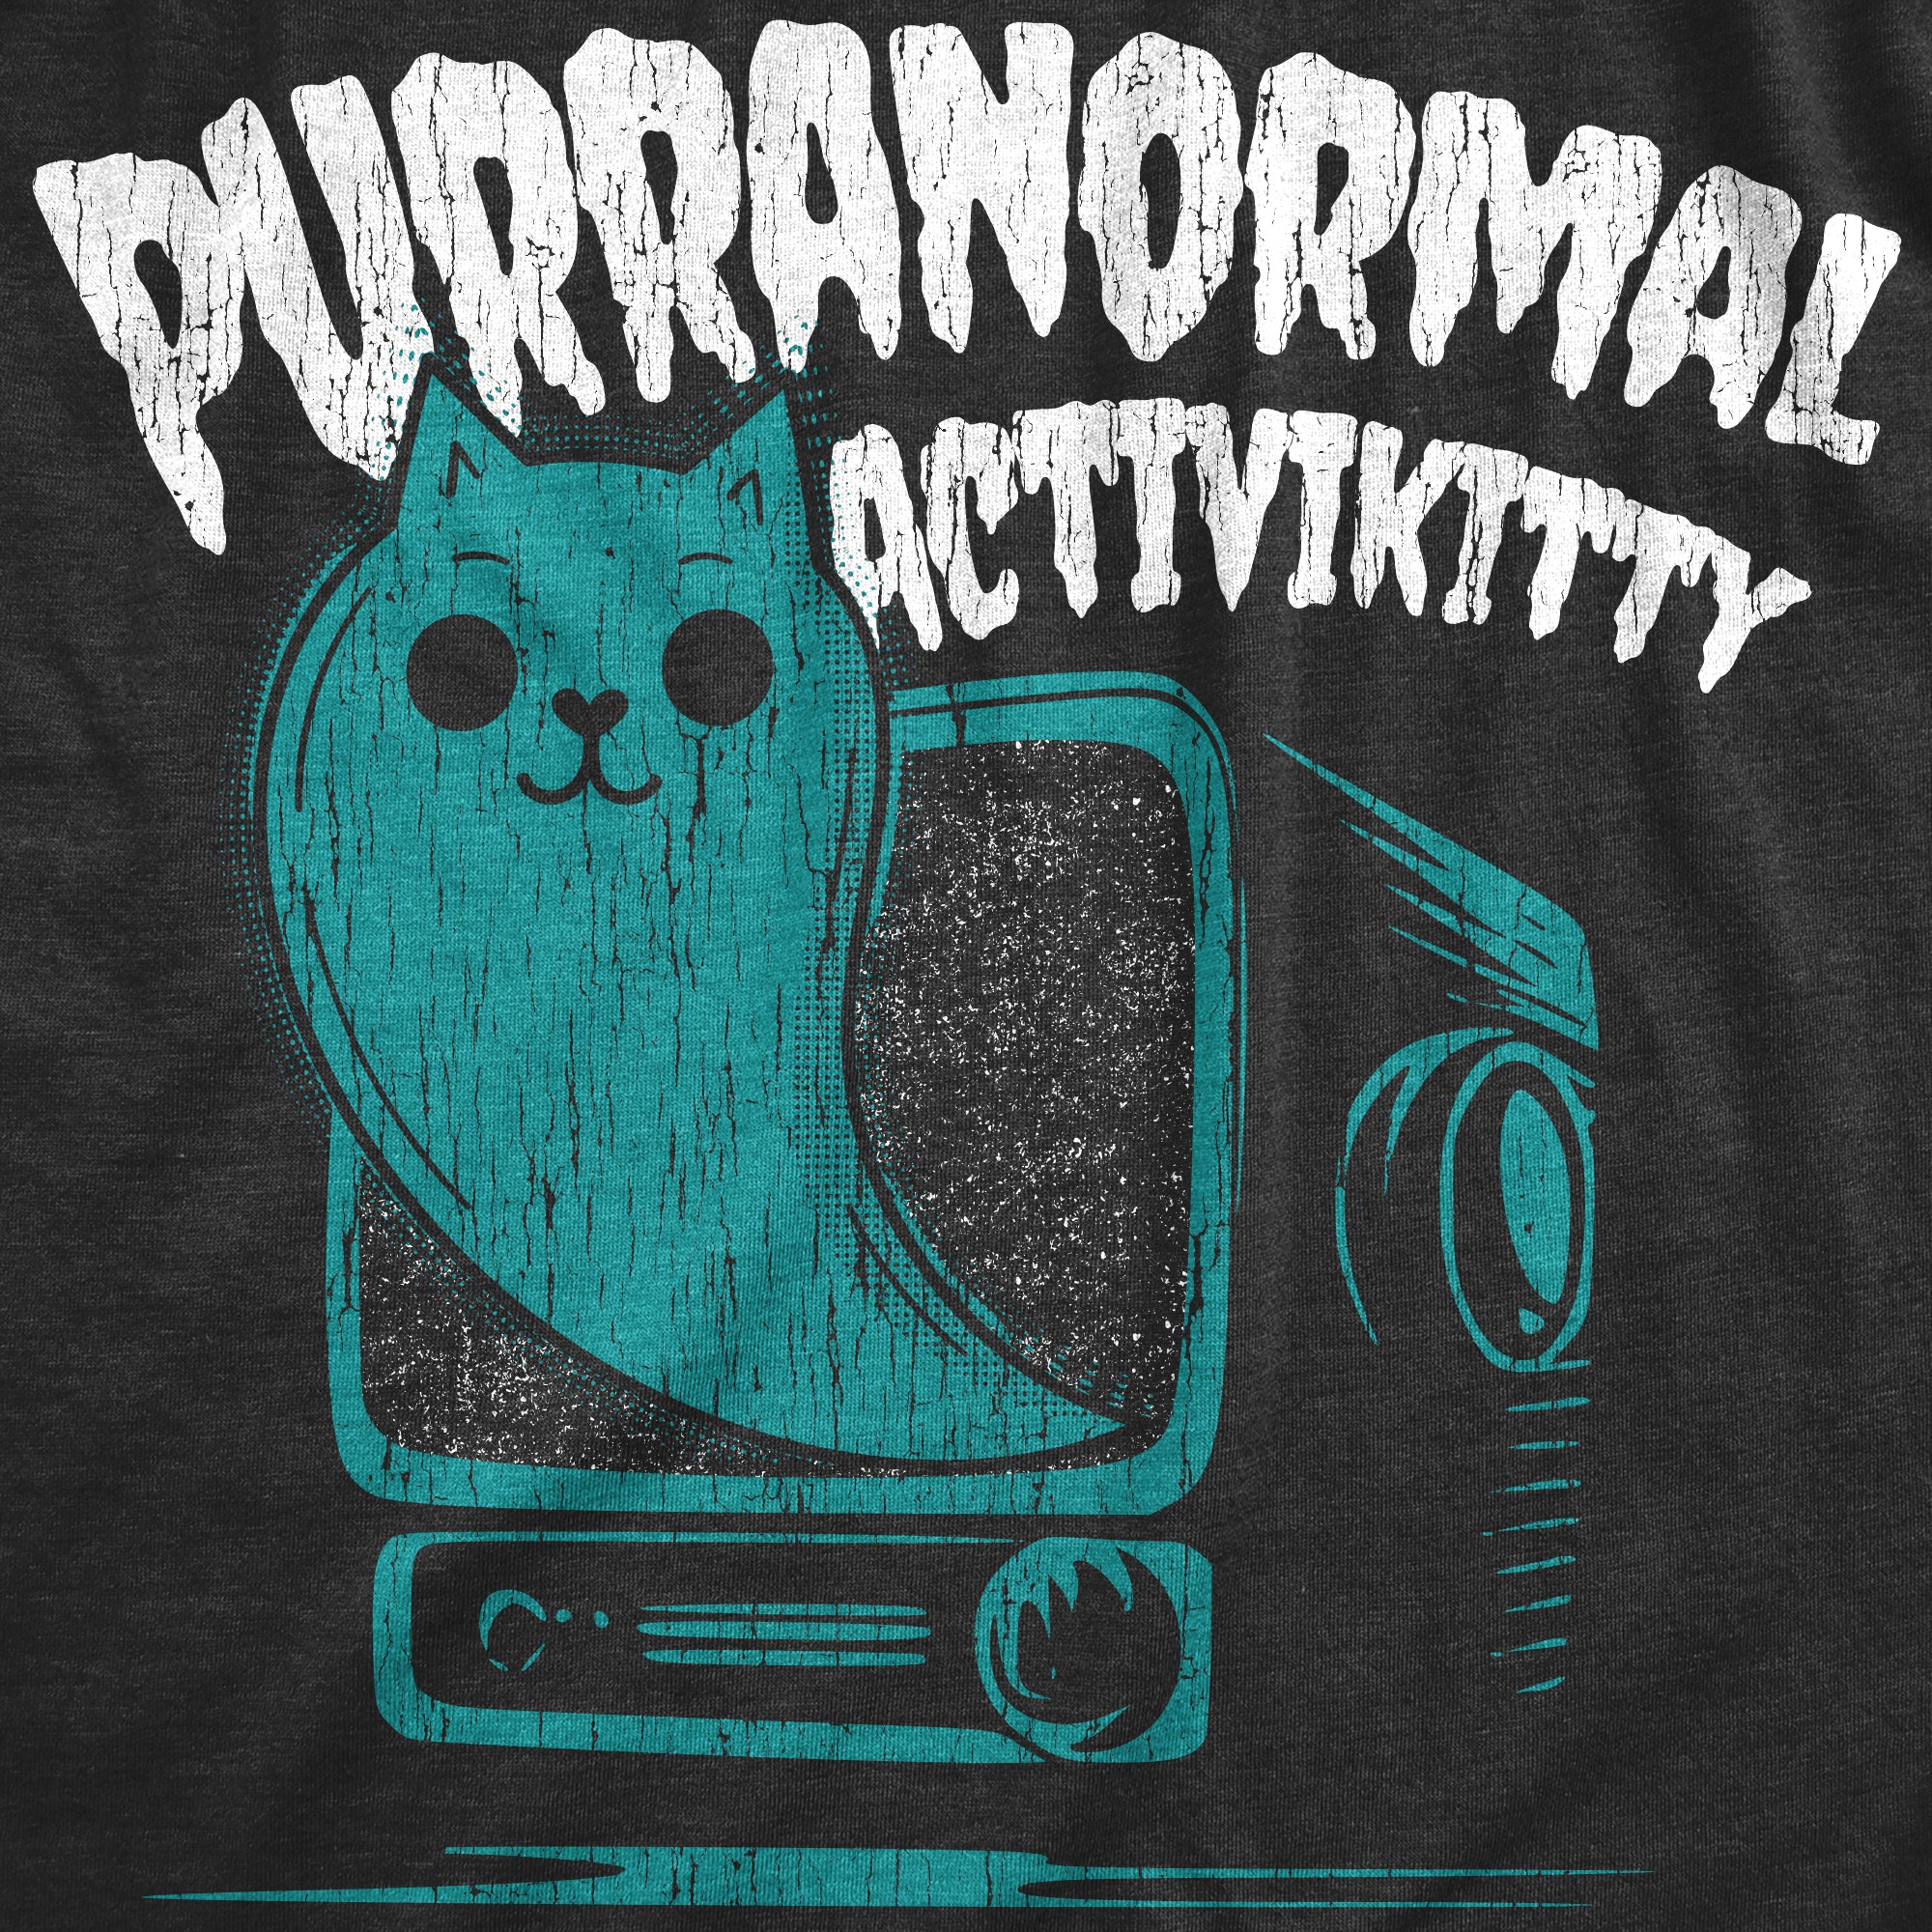 Funny Heather Black - PURRANORMAL Purranormal Activikitty - Paranormal Cat Mens T Shirt Nerdy Halloween Cat Tee